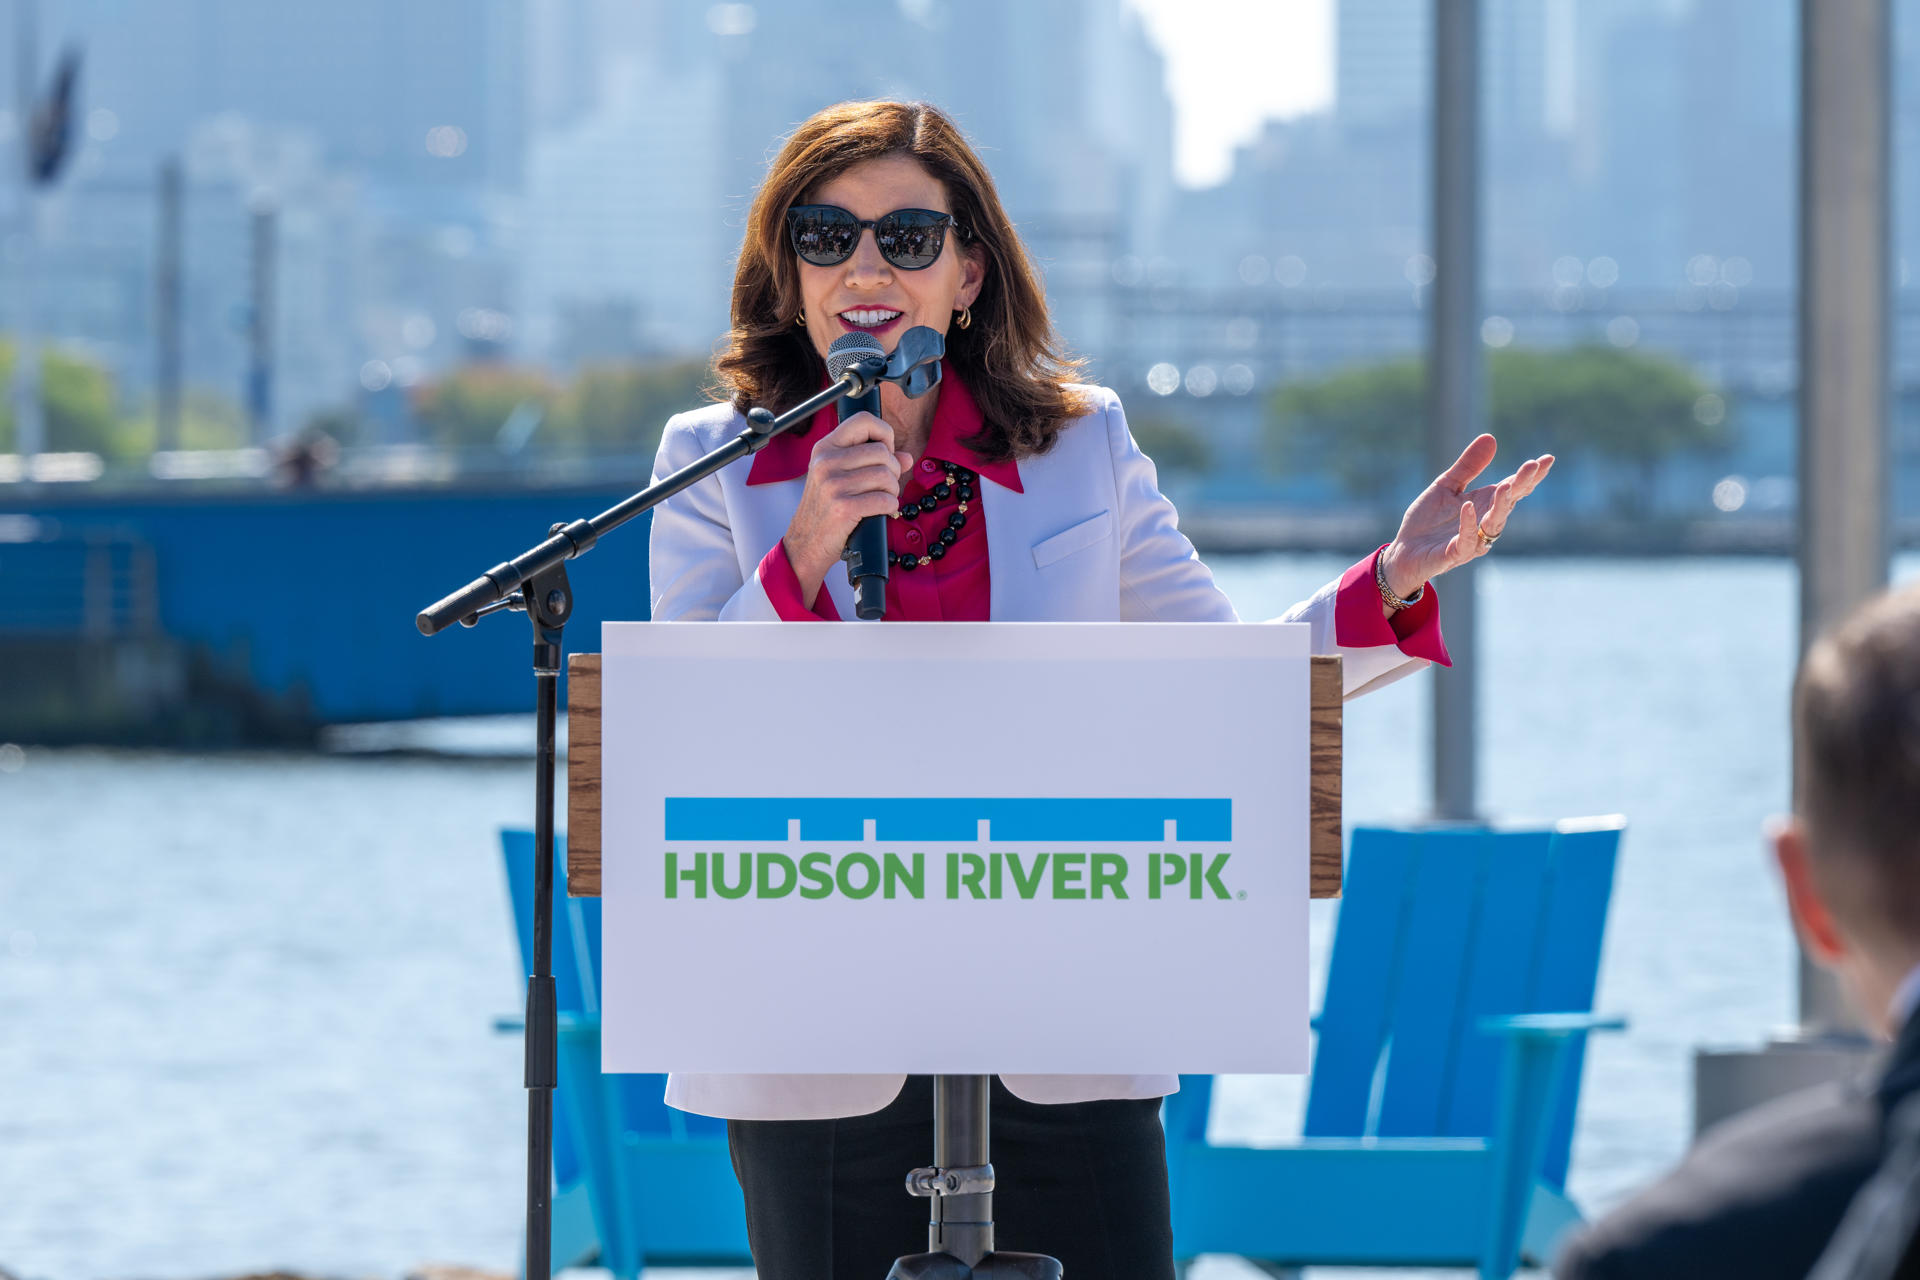 USA9300. NUEVA YORK (NY, EEUU), 02/10/2023.- Photo provided today by the New York Governor's Office showing Governor Kathy Hochul during the dedication of the Gansevoort Peninsula in Hudson River Park, New York (USA). EFE/Governor's Office of New York / Darren McGee /EDITORIAL USE ONLY / NO SALES / ONLY AVAILABLE TO ILLUSTRATE THE NEWS IT ACCOMPANIES /CREDIT REQUIRED
